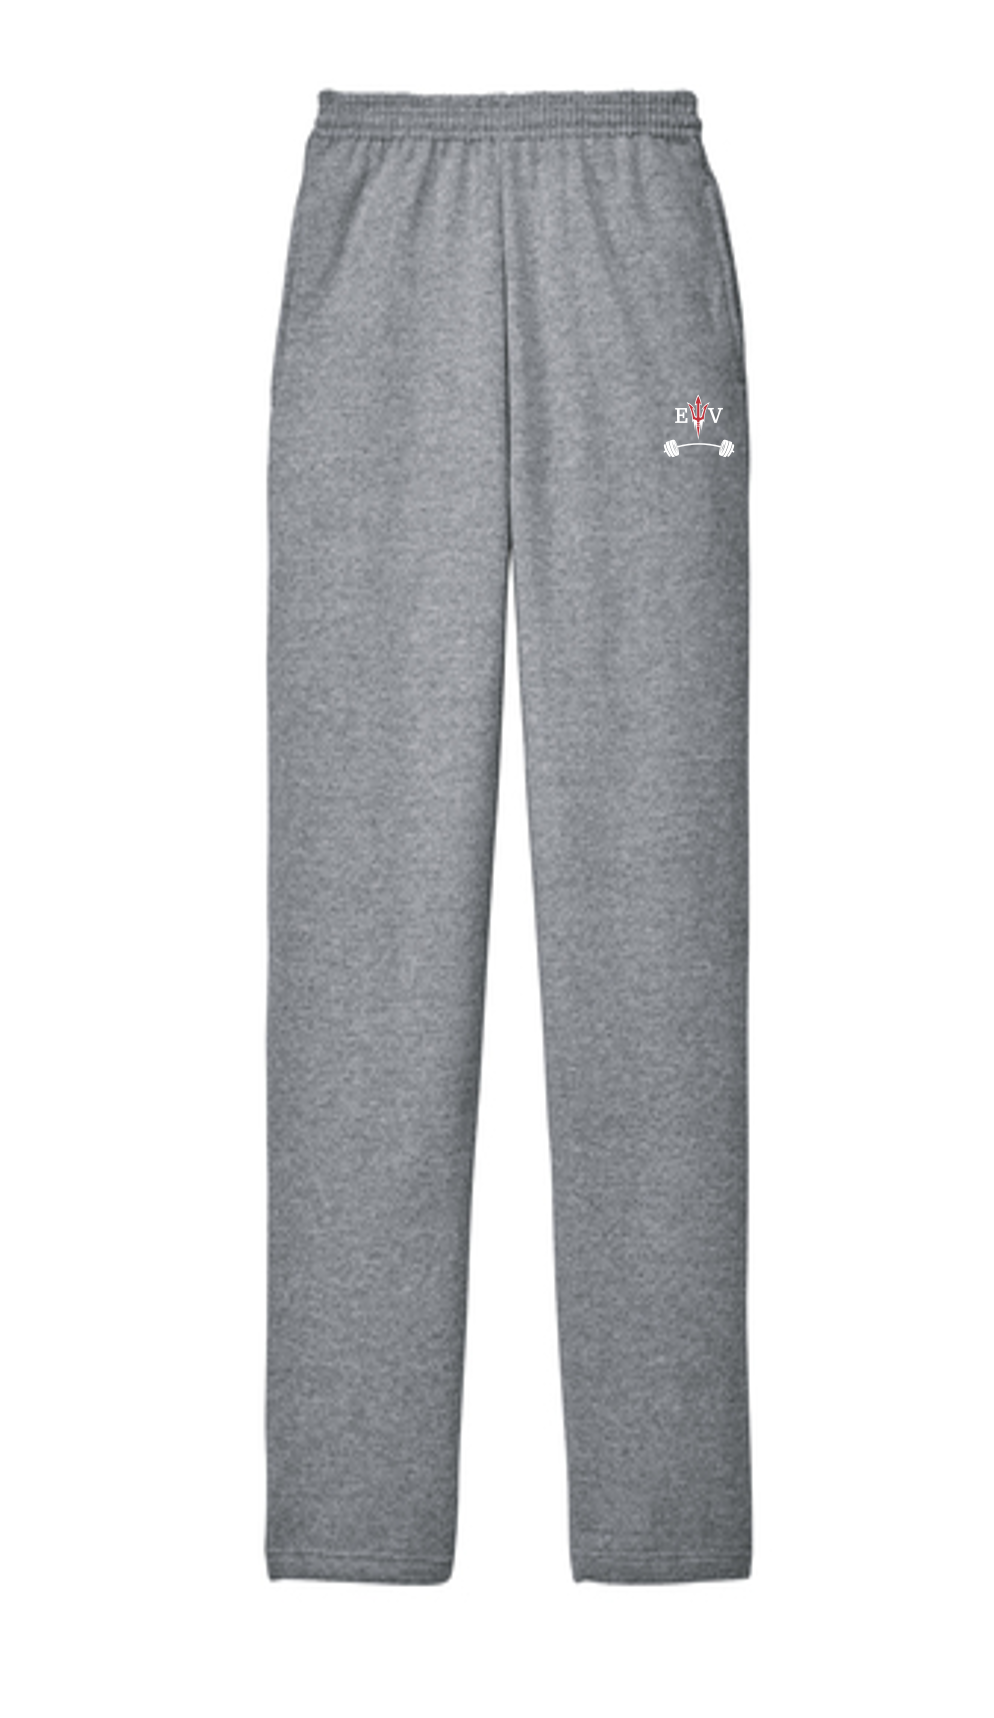 Sweatpants - Eagle Valley Strength and Conditioning